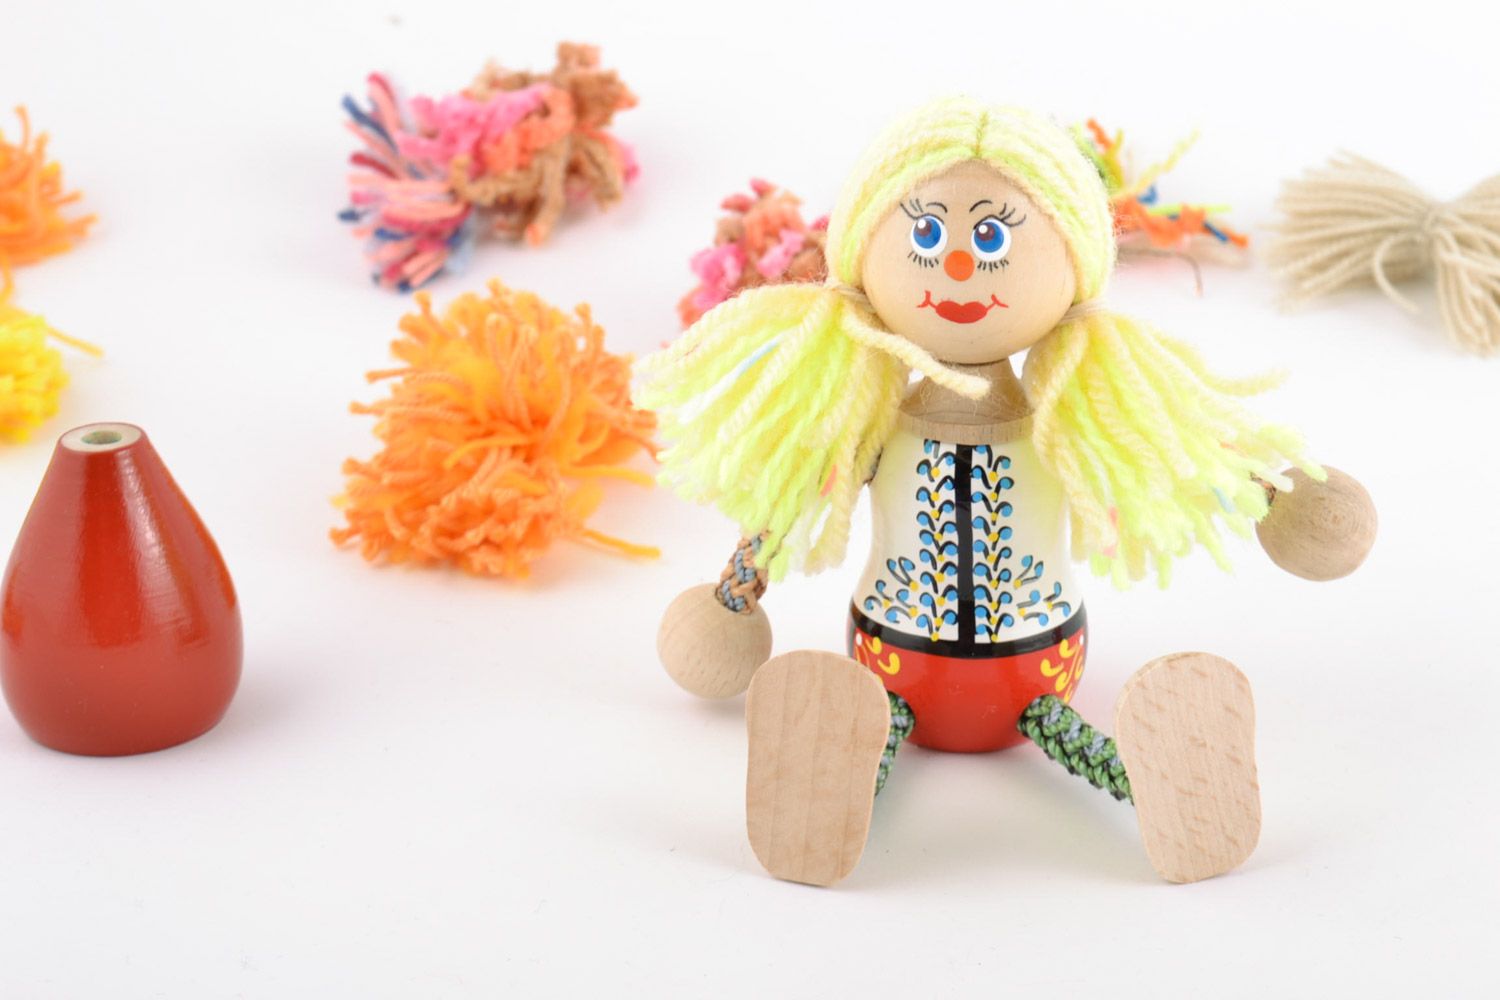 Handmade decorative wooden painted toy in the form of painted doll eco friendly toys photo 1